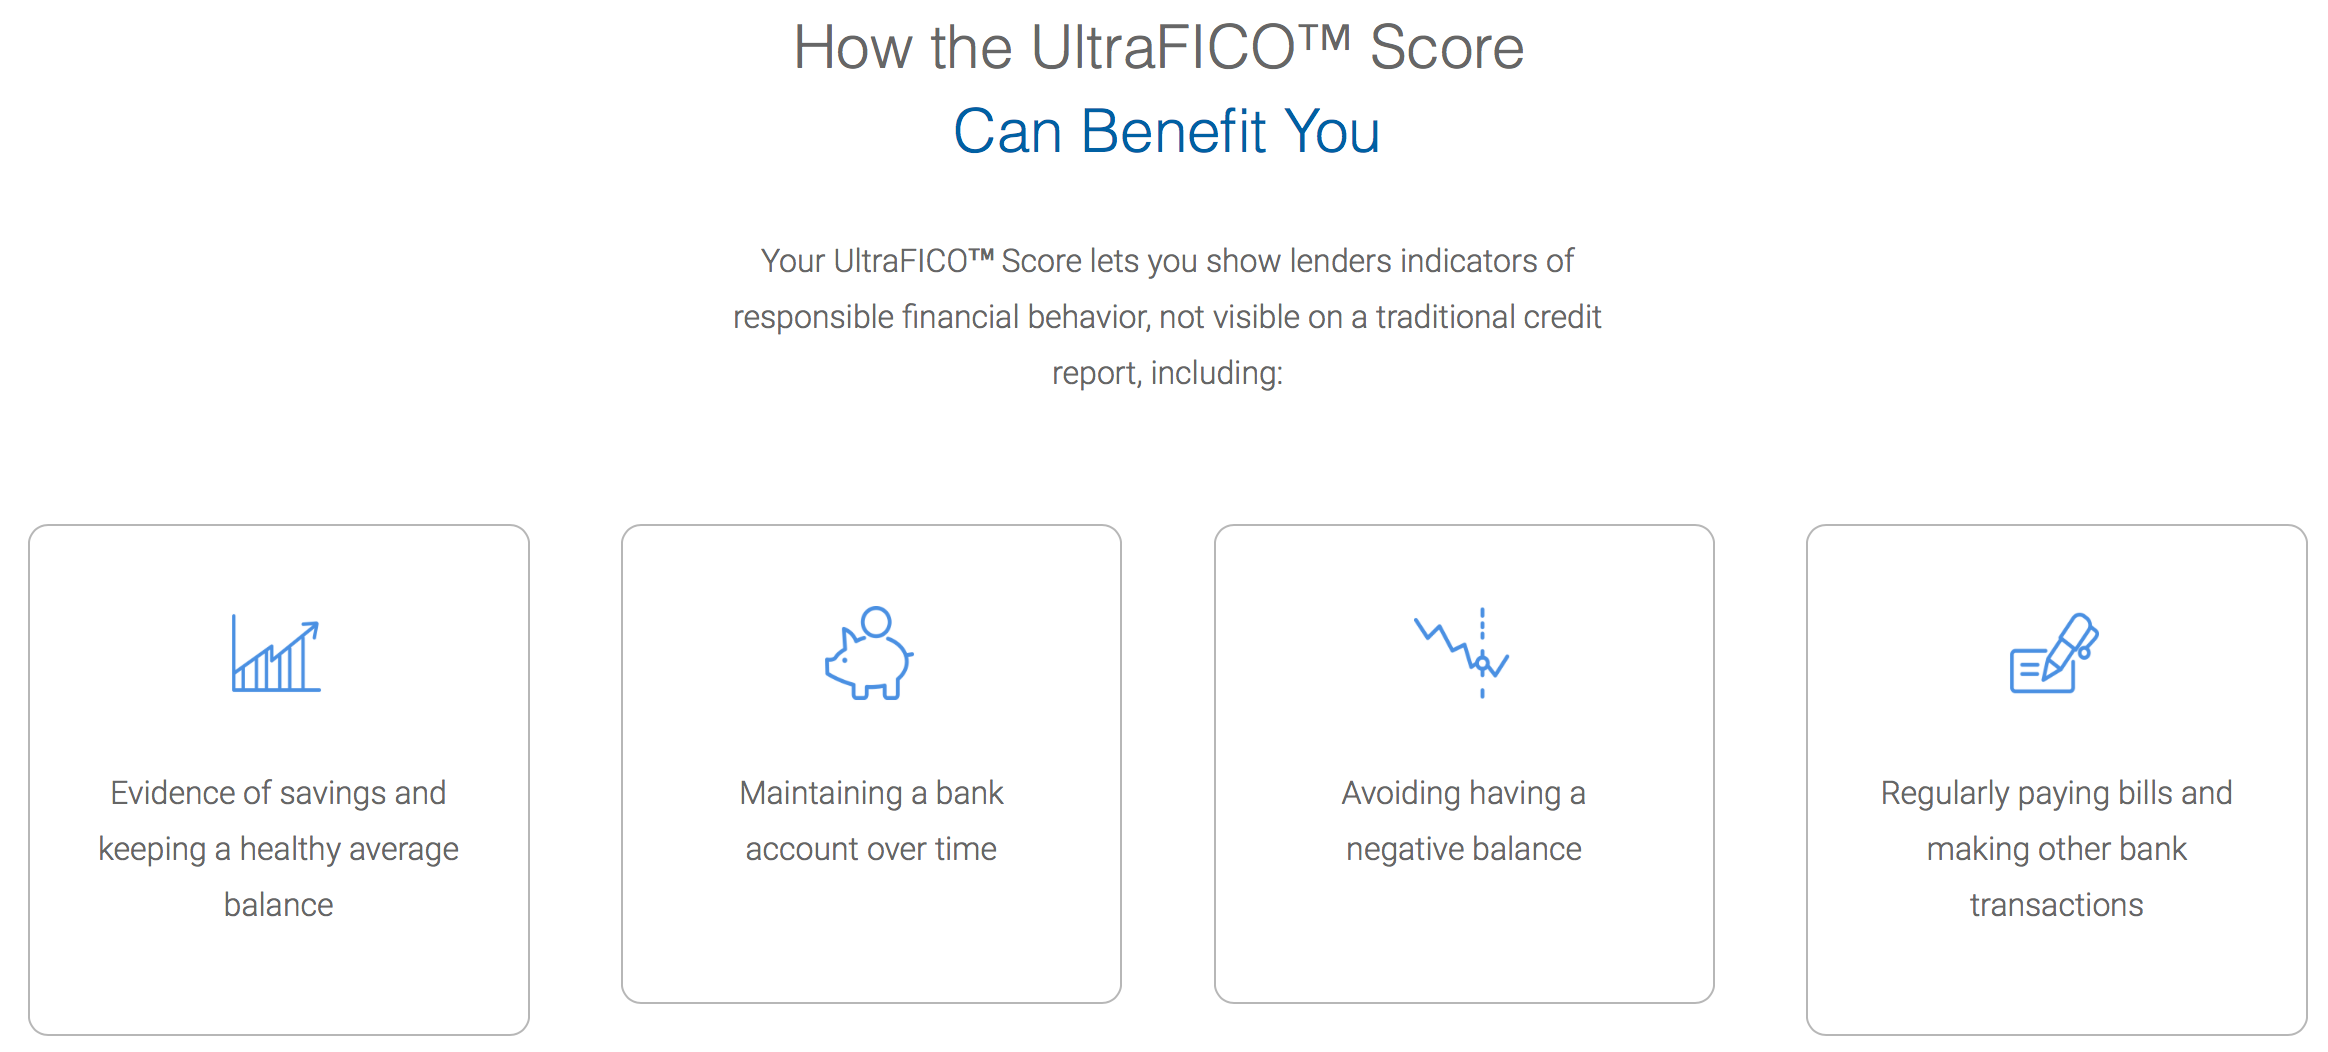 How does UltraFICO work